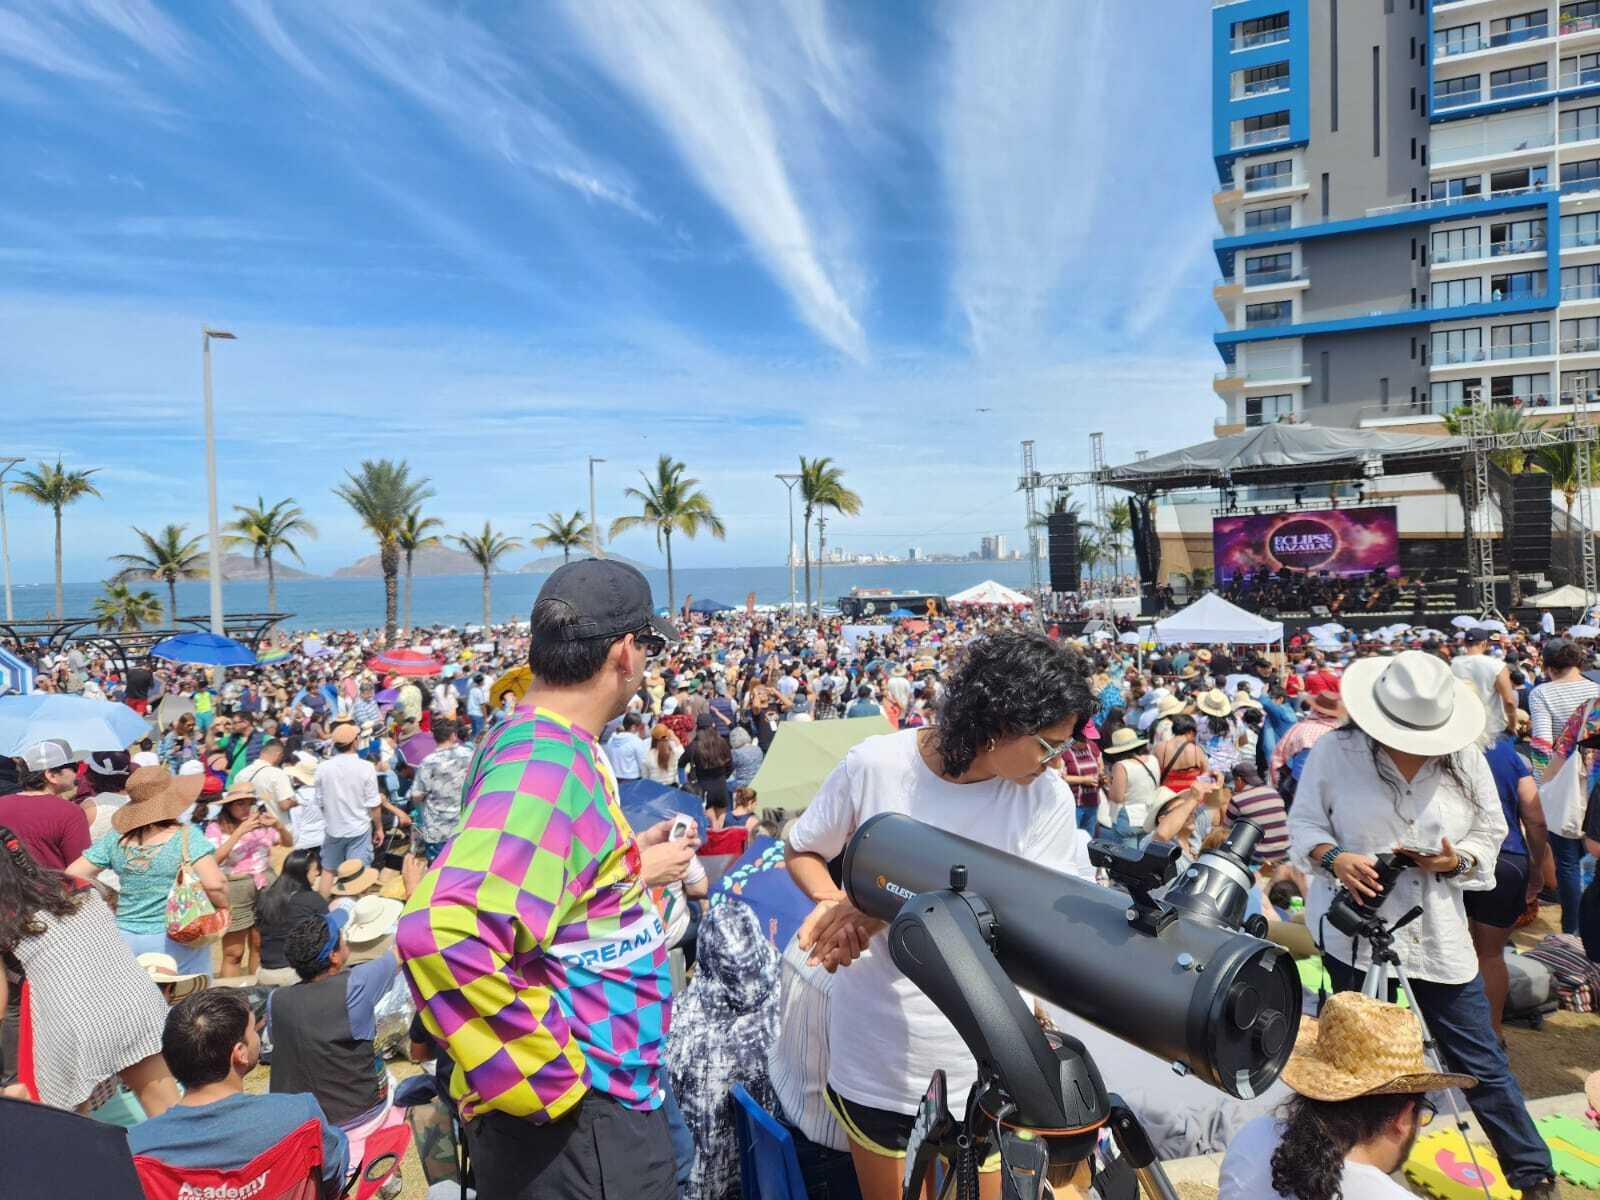 On April 8, thousands came to Mazatlán from all over the world to experience the solar eclipse.